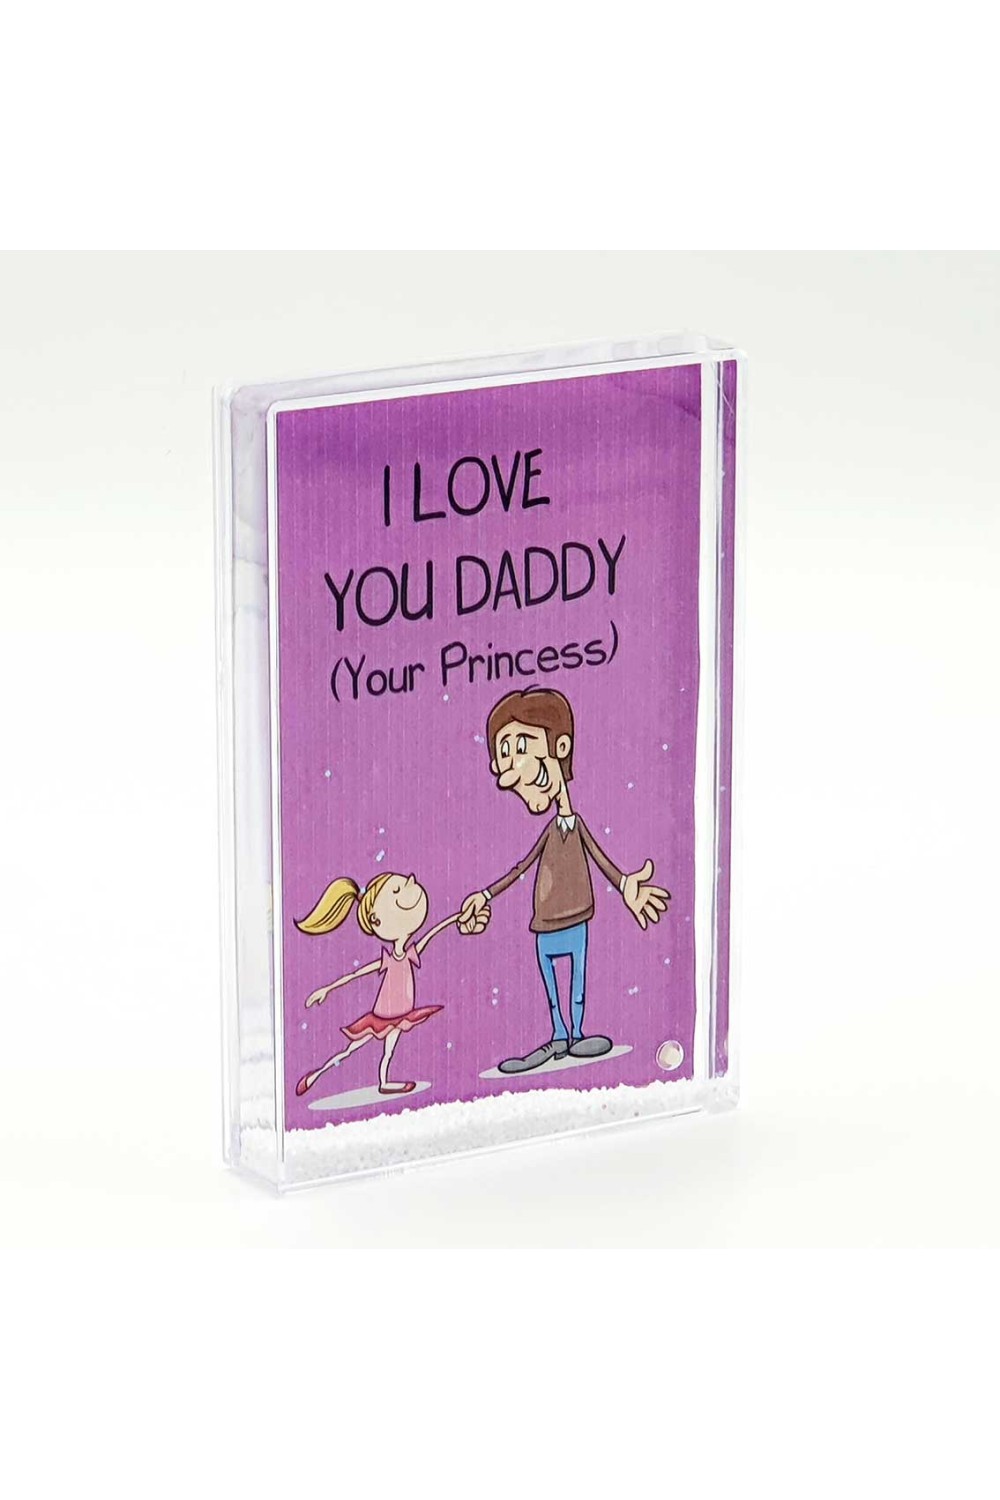 I Love You Daddy - Glitter Frame (Small)